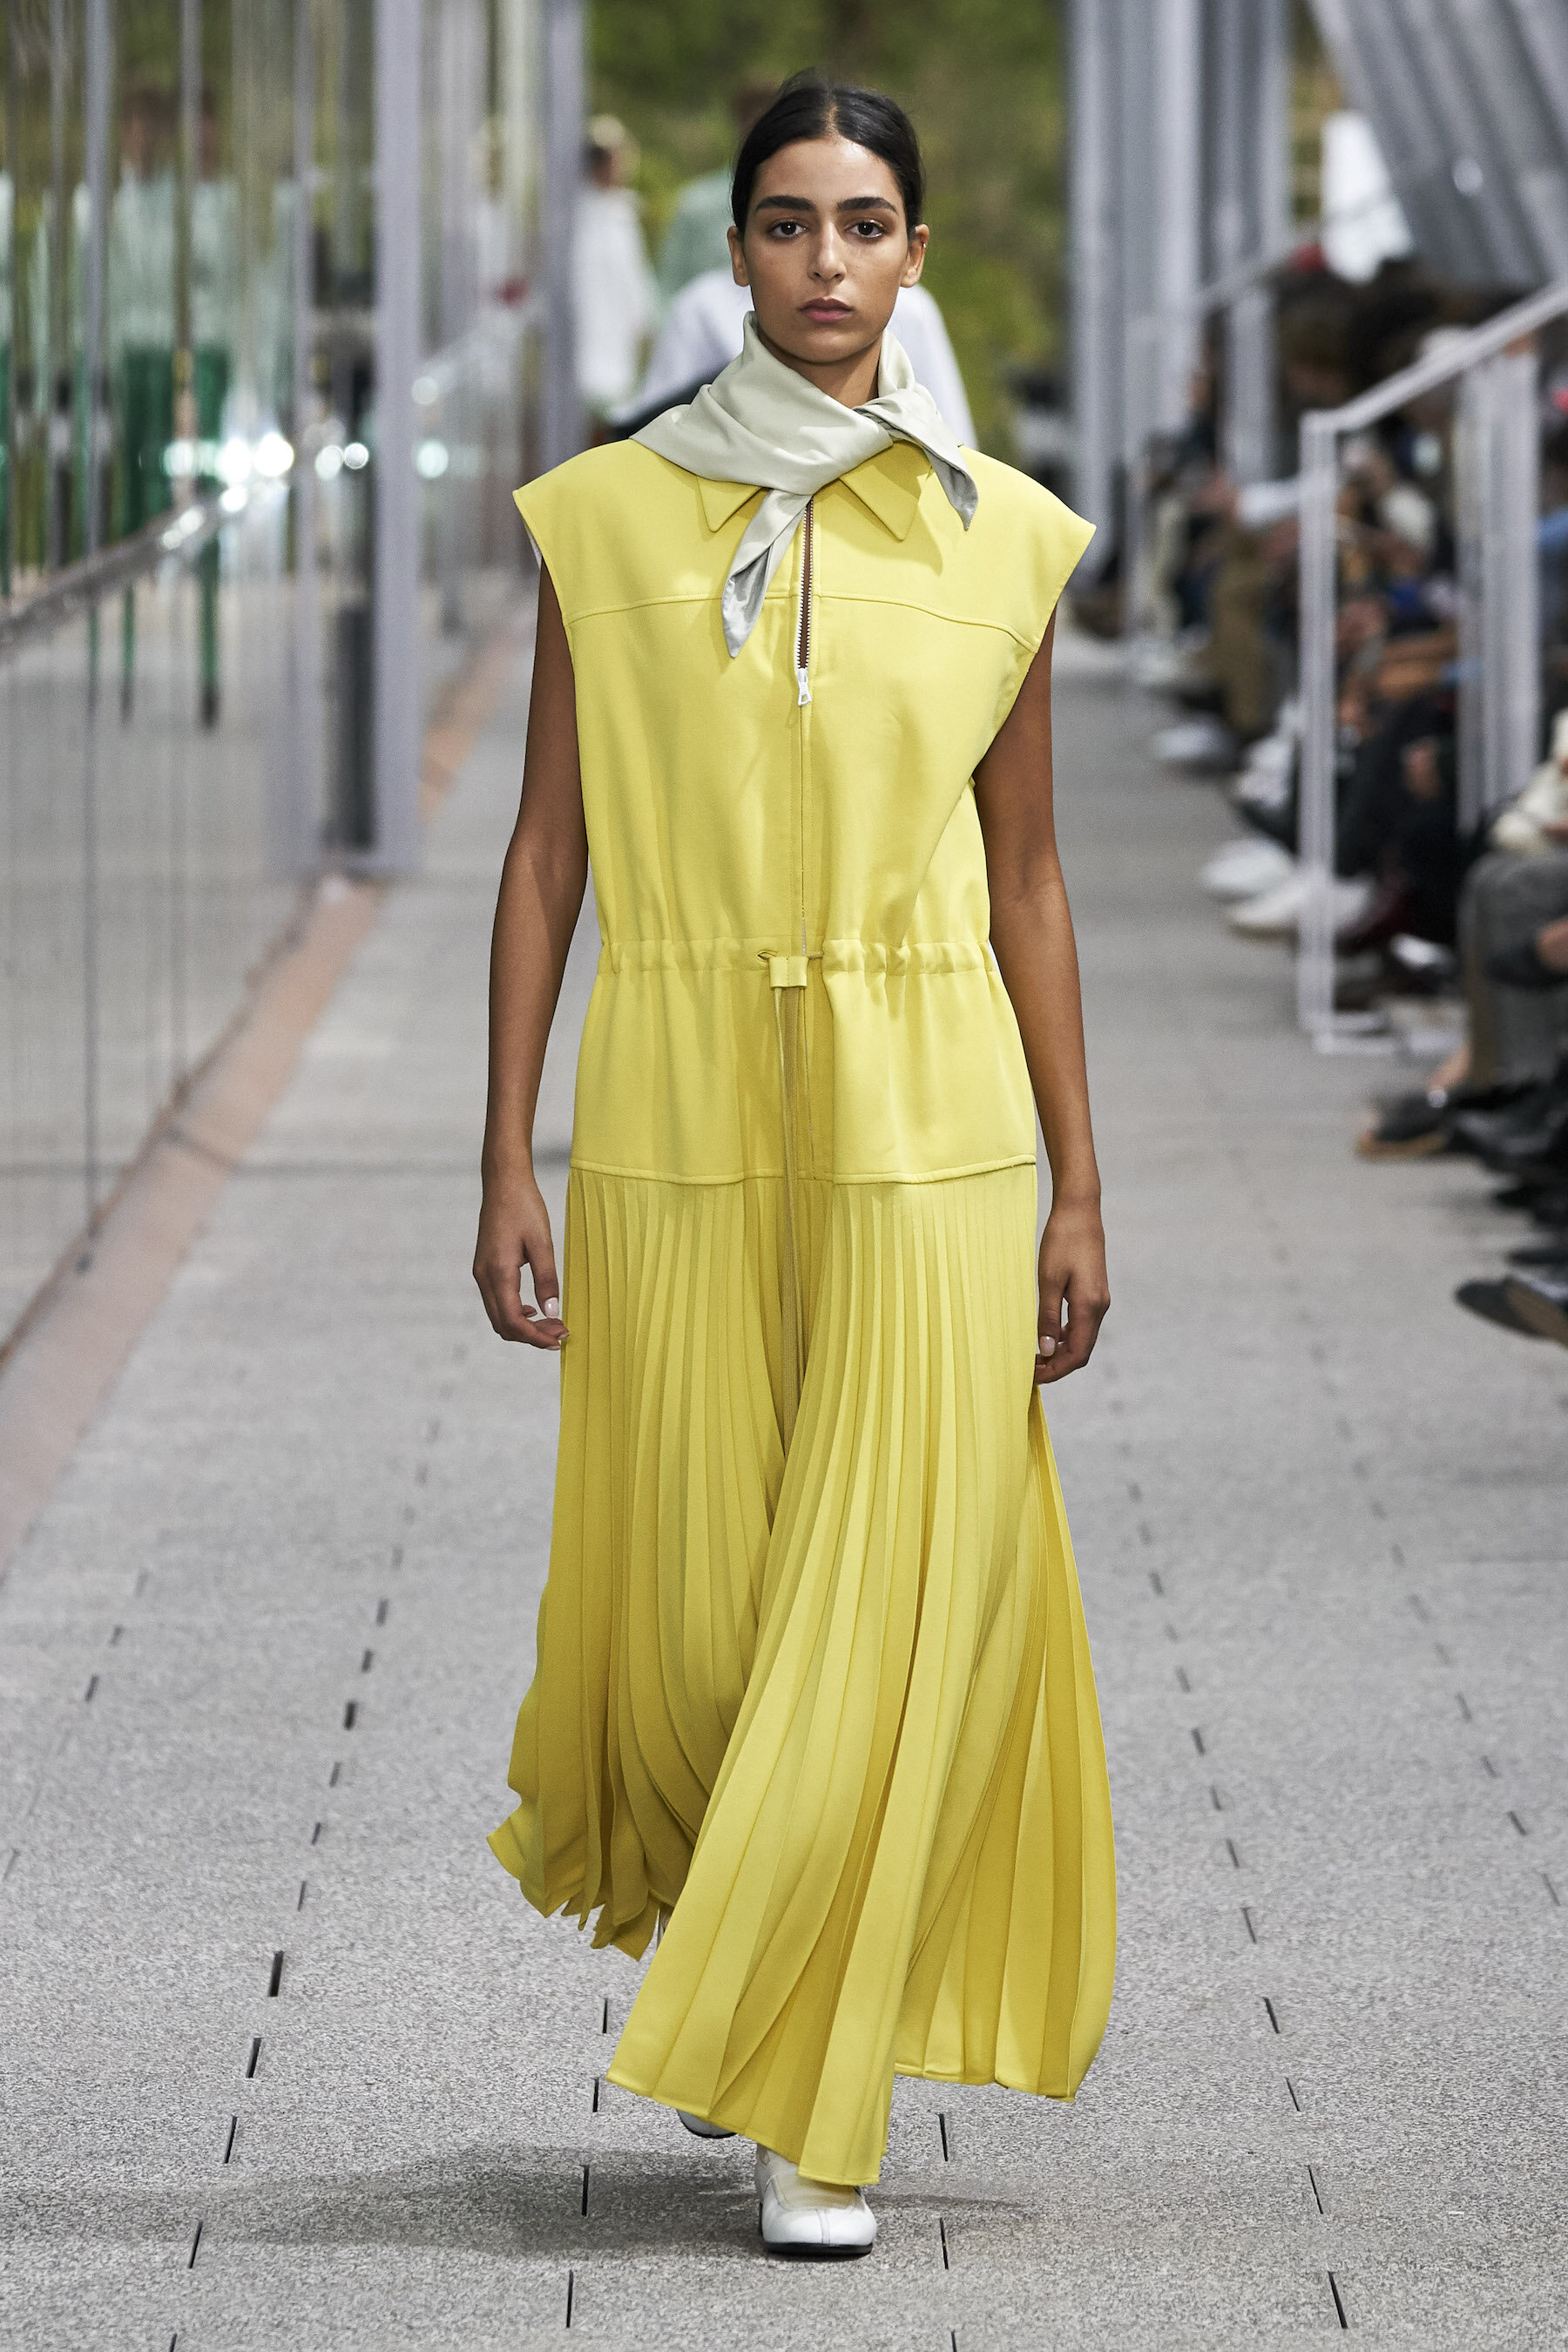 Lacoste SS20_LOOK 32 by Alessandro Lucioni  Imaxtree.com.jpg